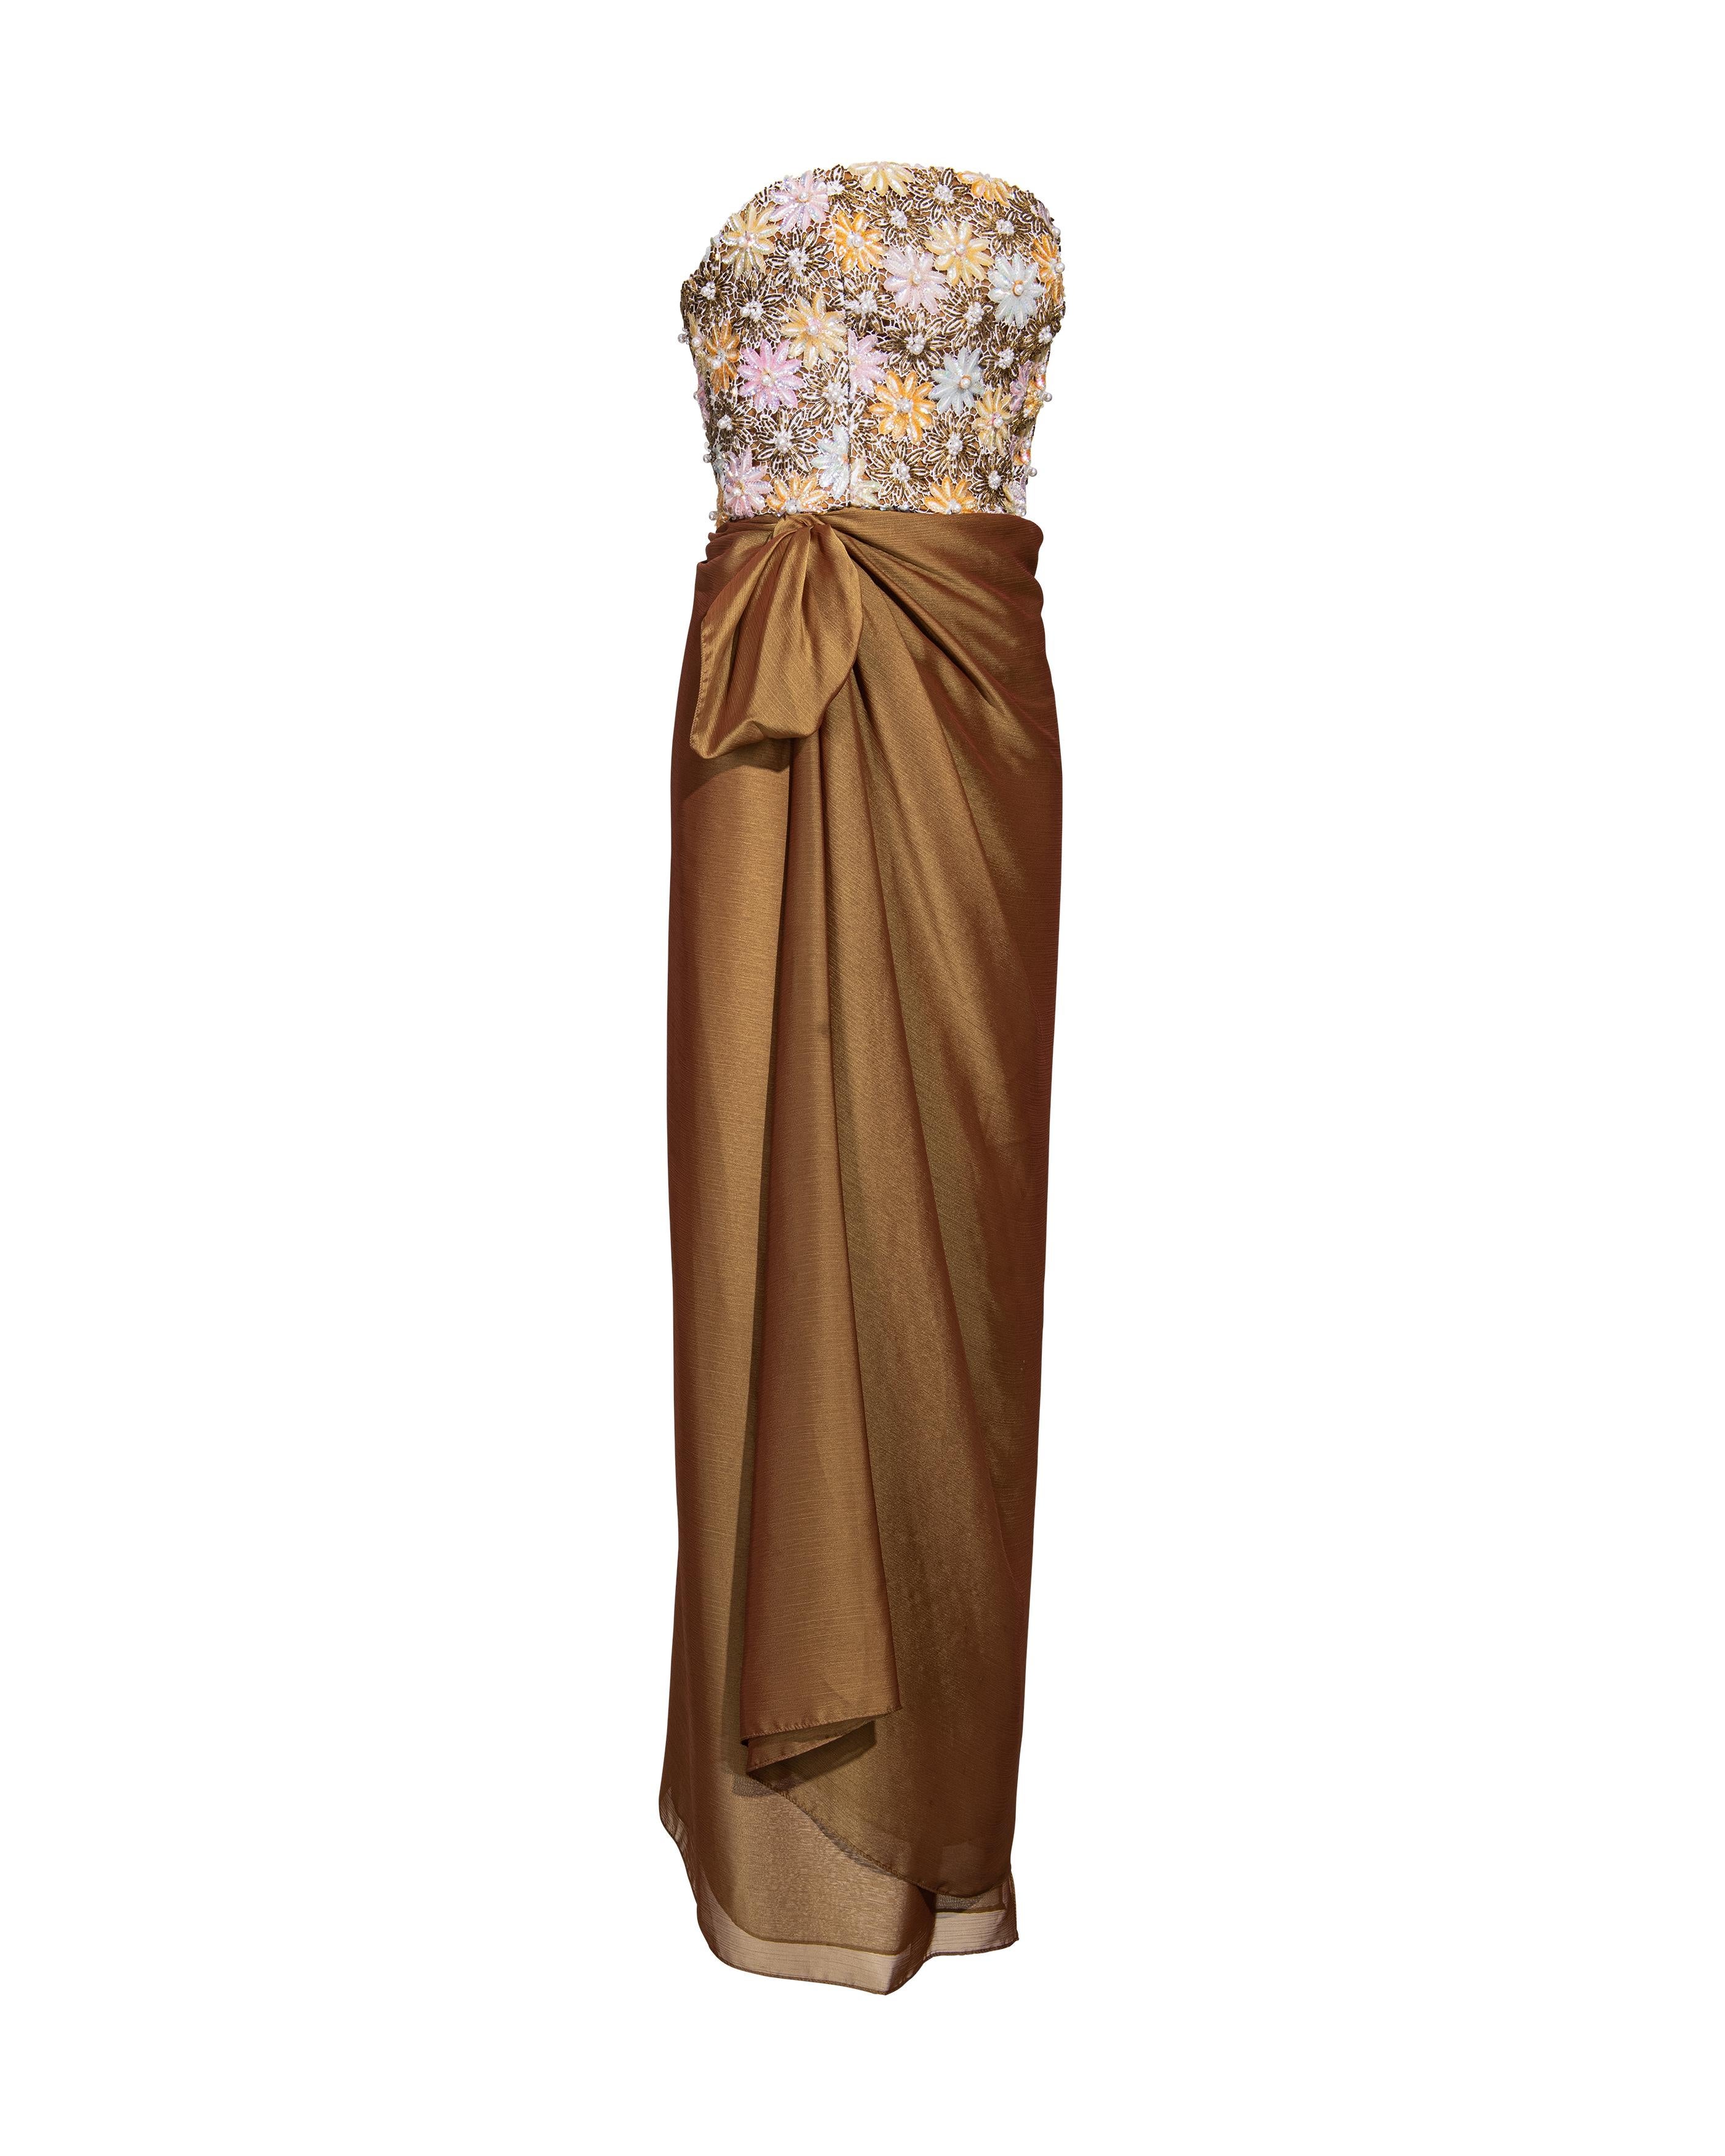 c. 1991 Nina Ricci Embellished Copper Strapless Gown with Stole For Sale 1